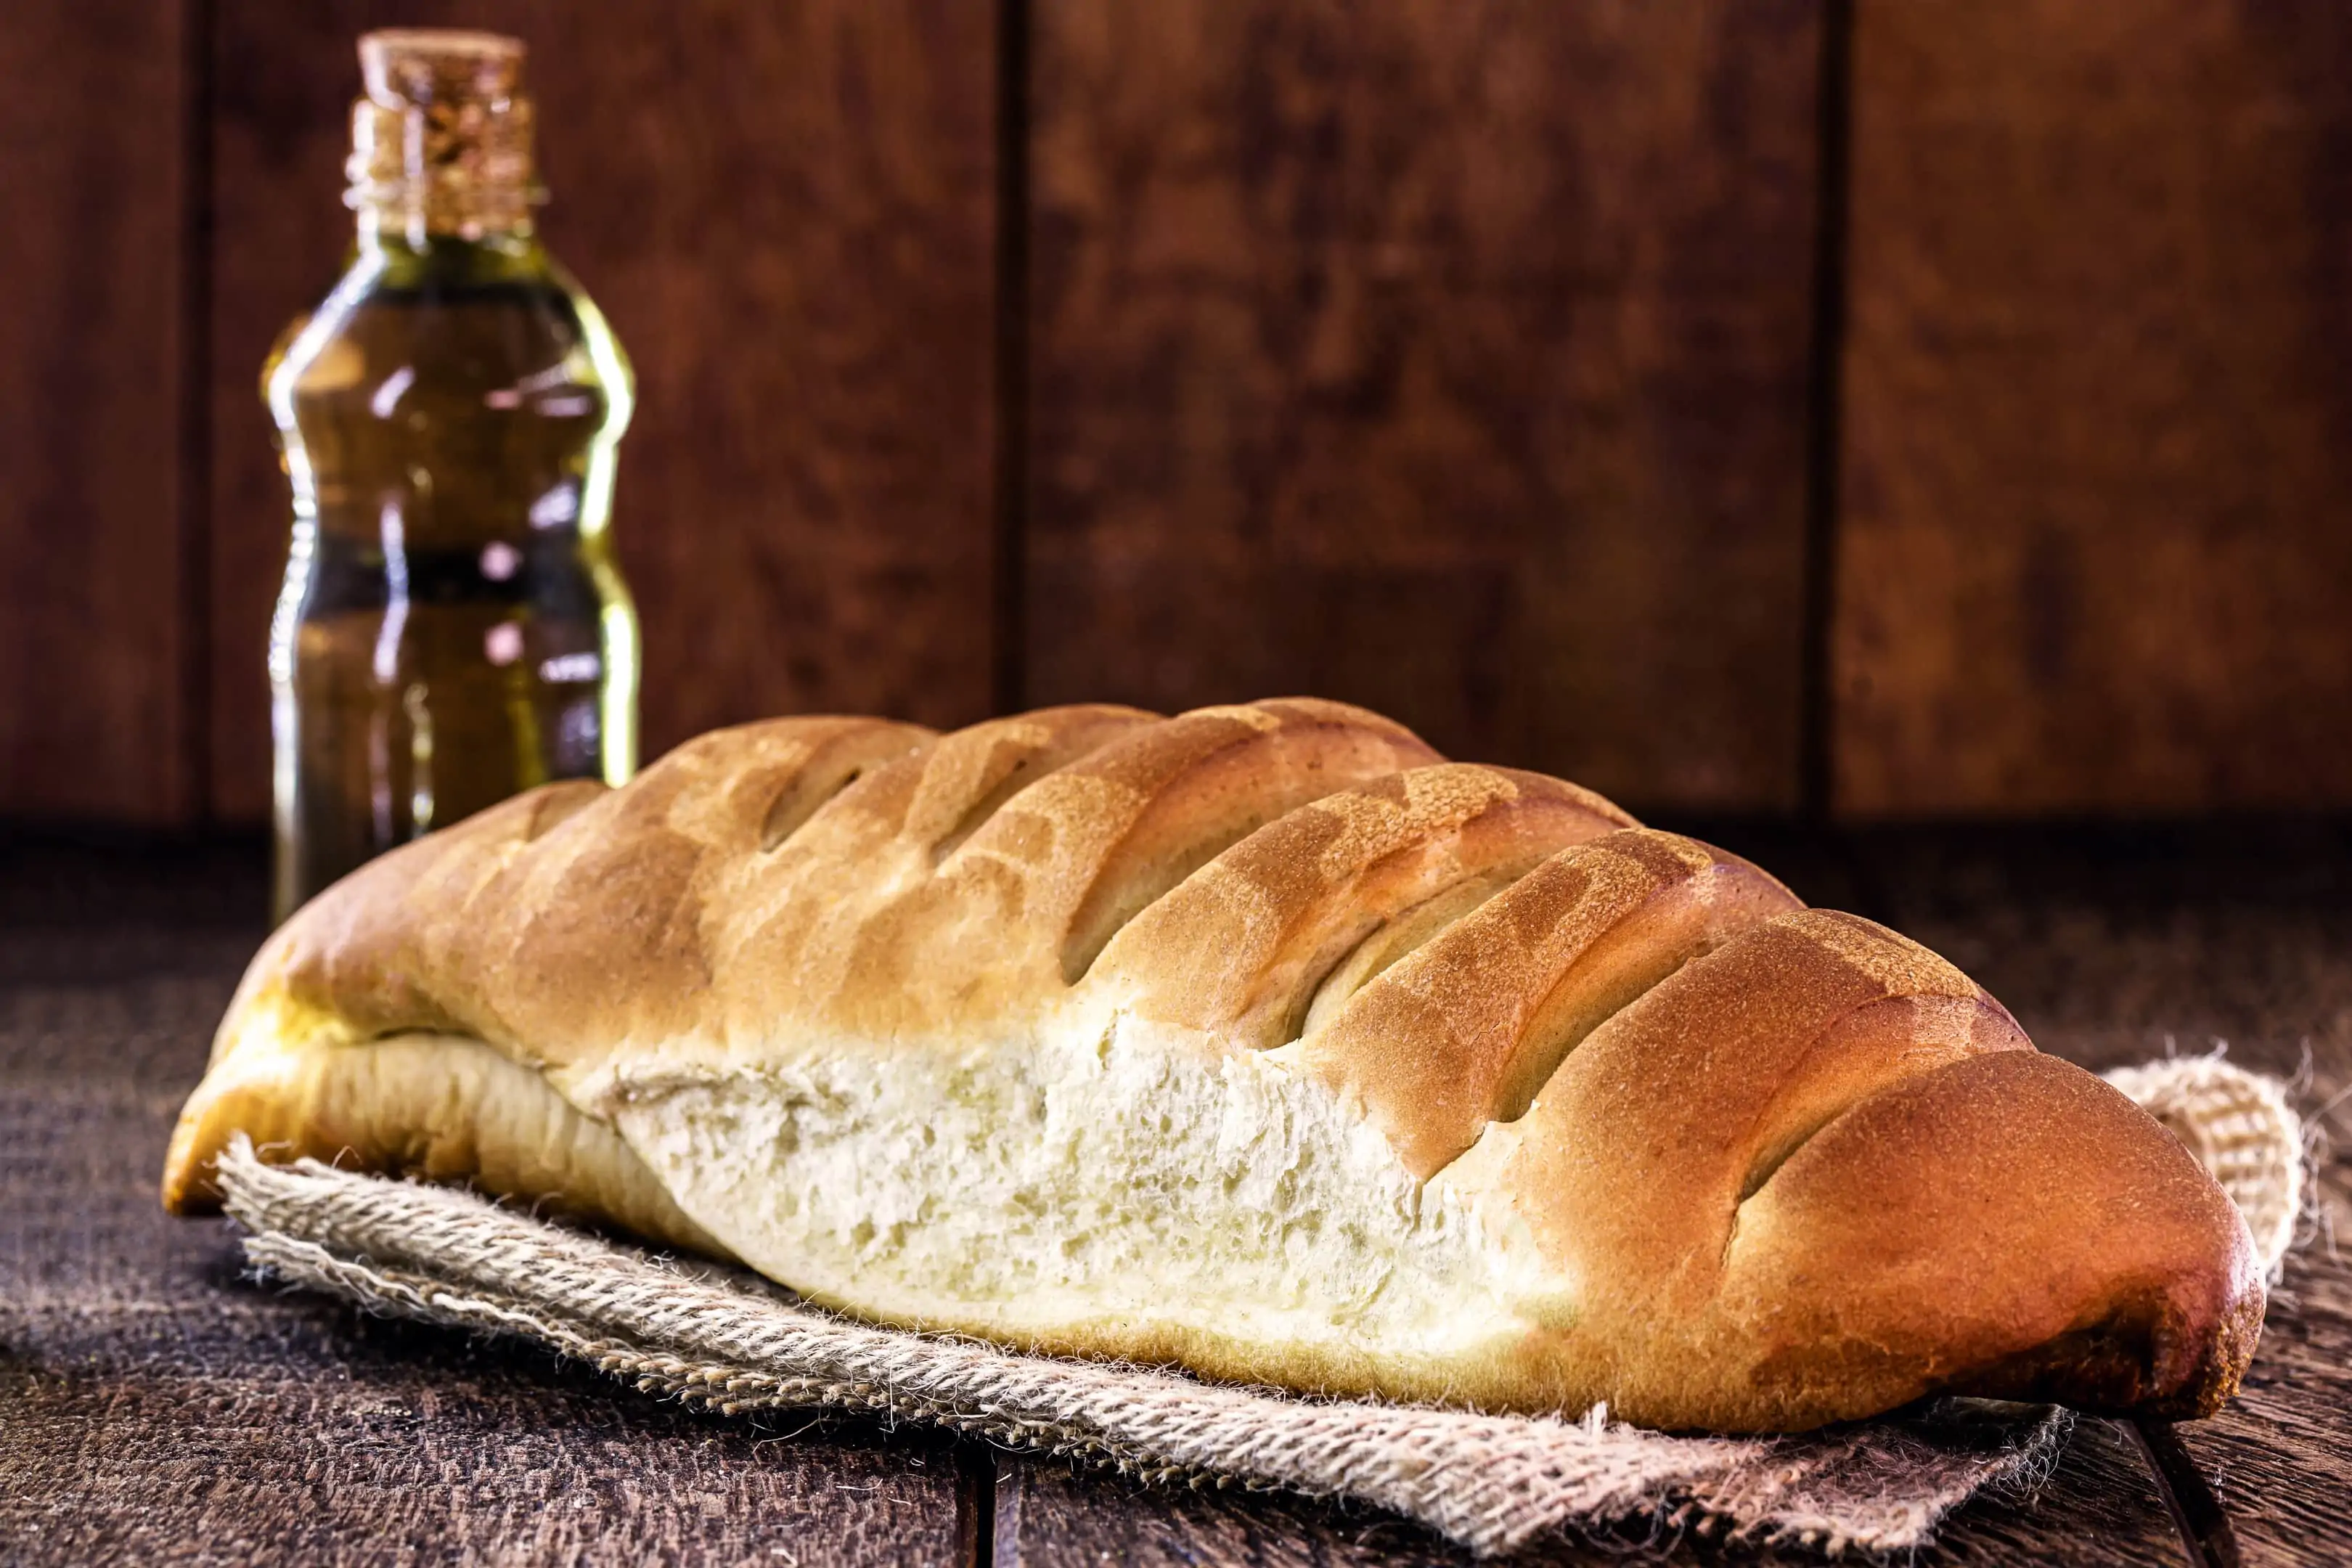 Gluten-free olive bread made with xanthan gum